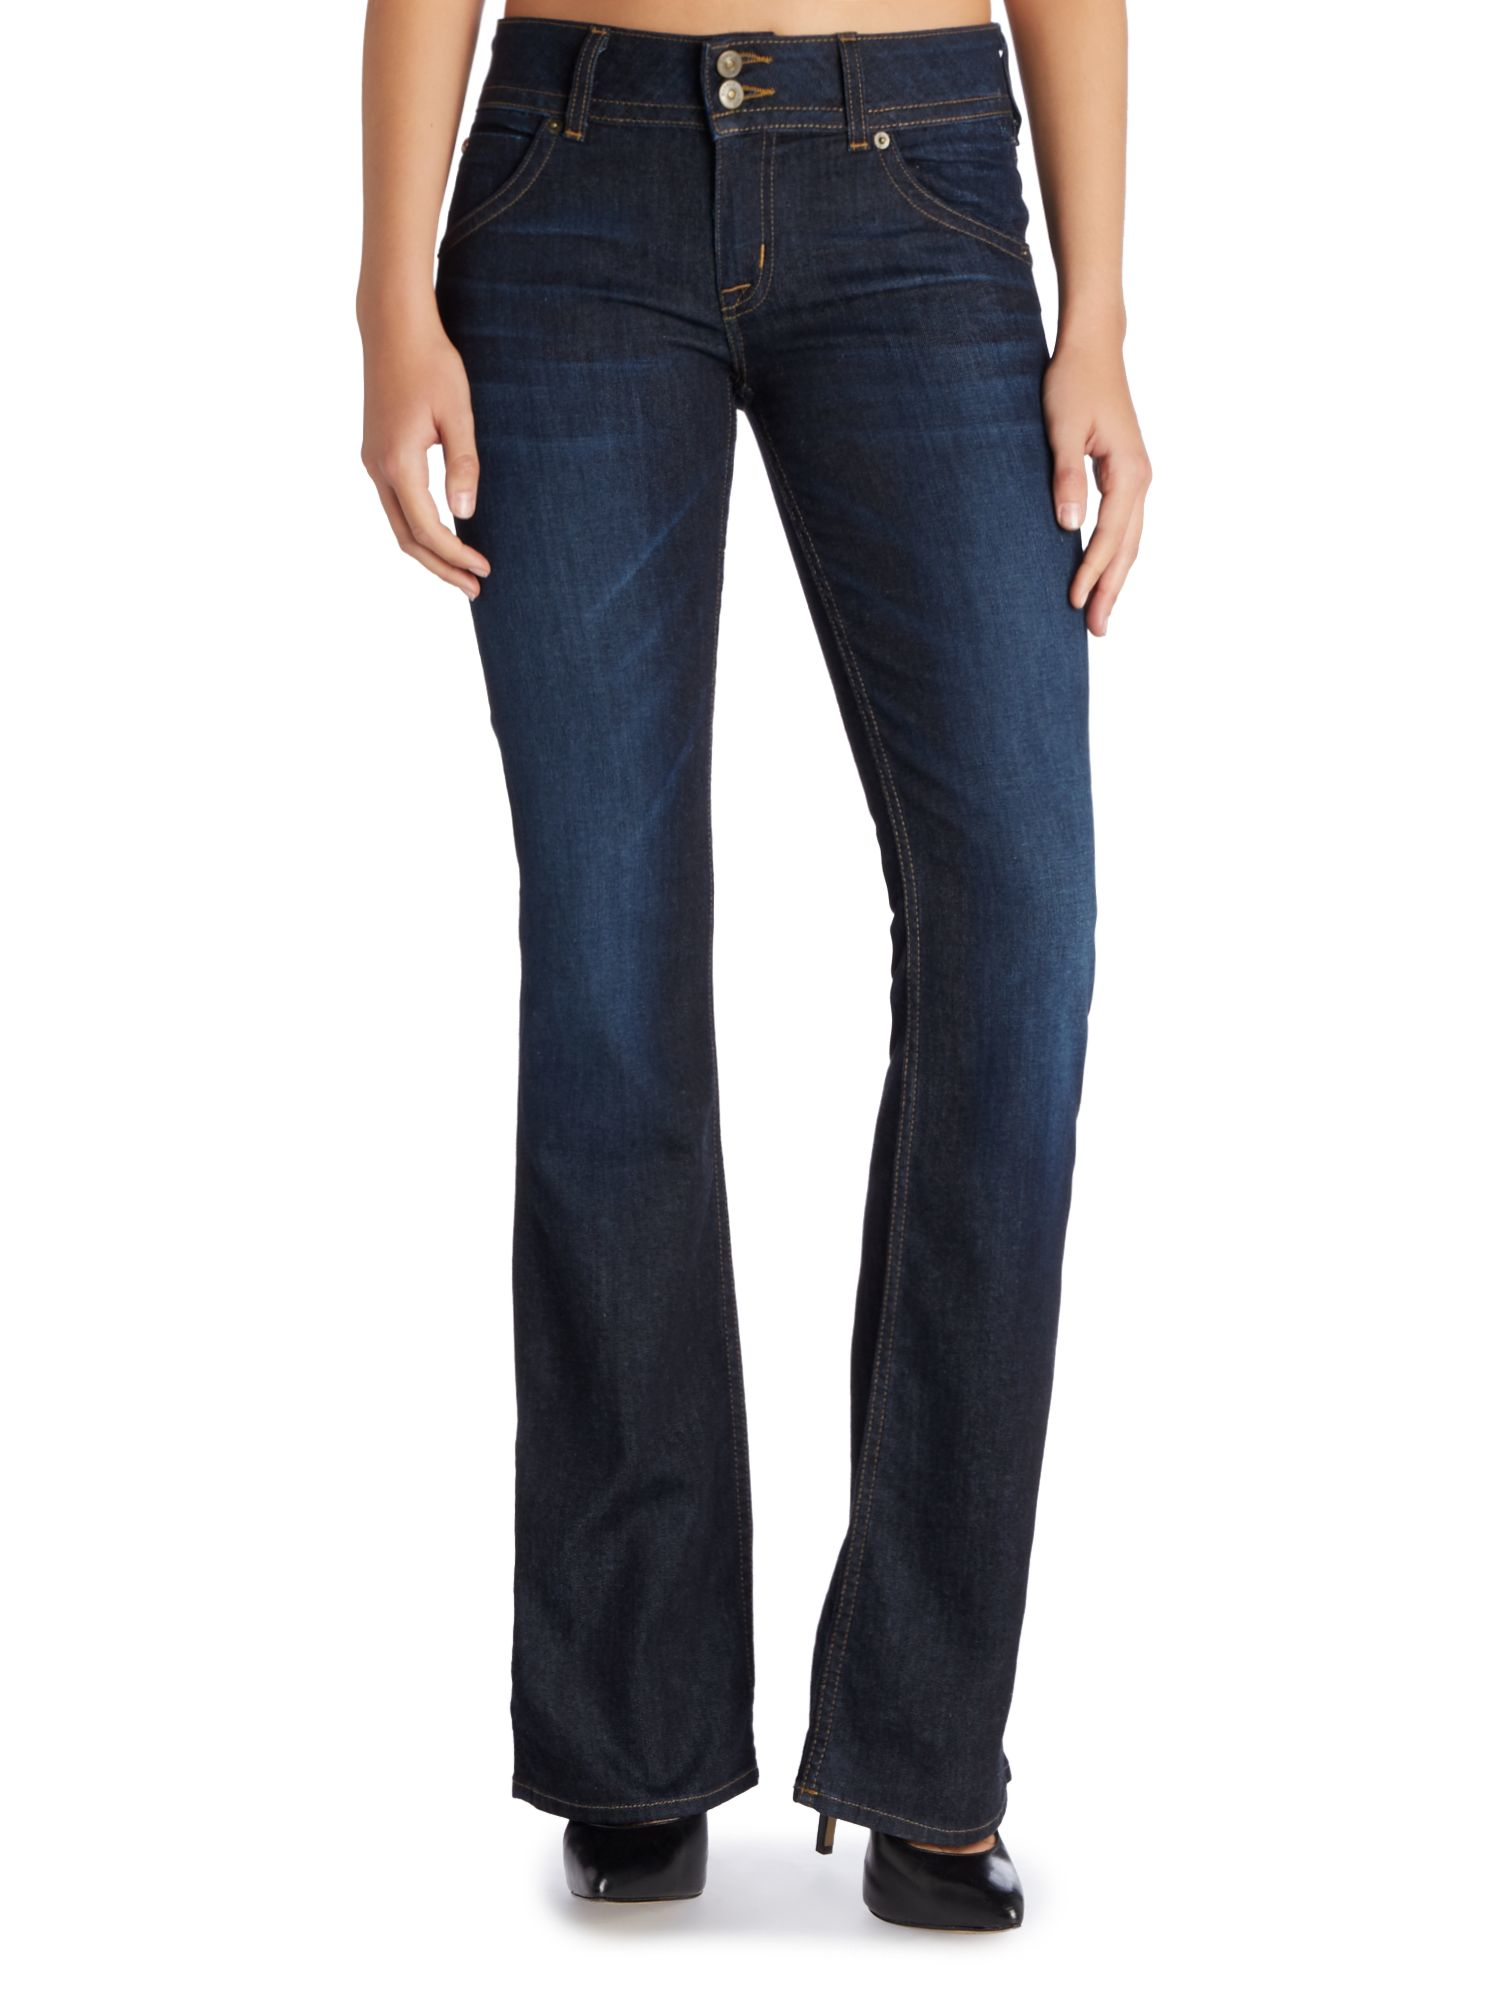 Hudson jeans Signature Bootcut Jean In Firefly in Blue | Lyst